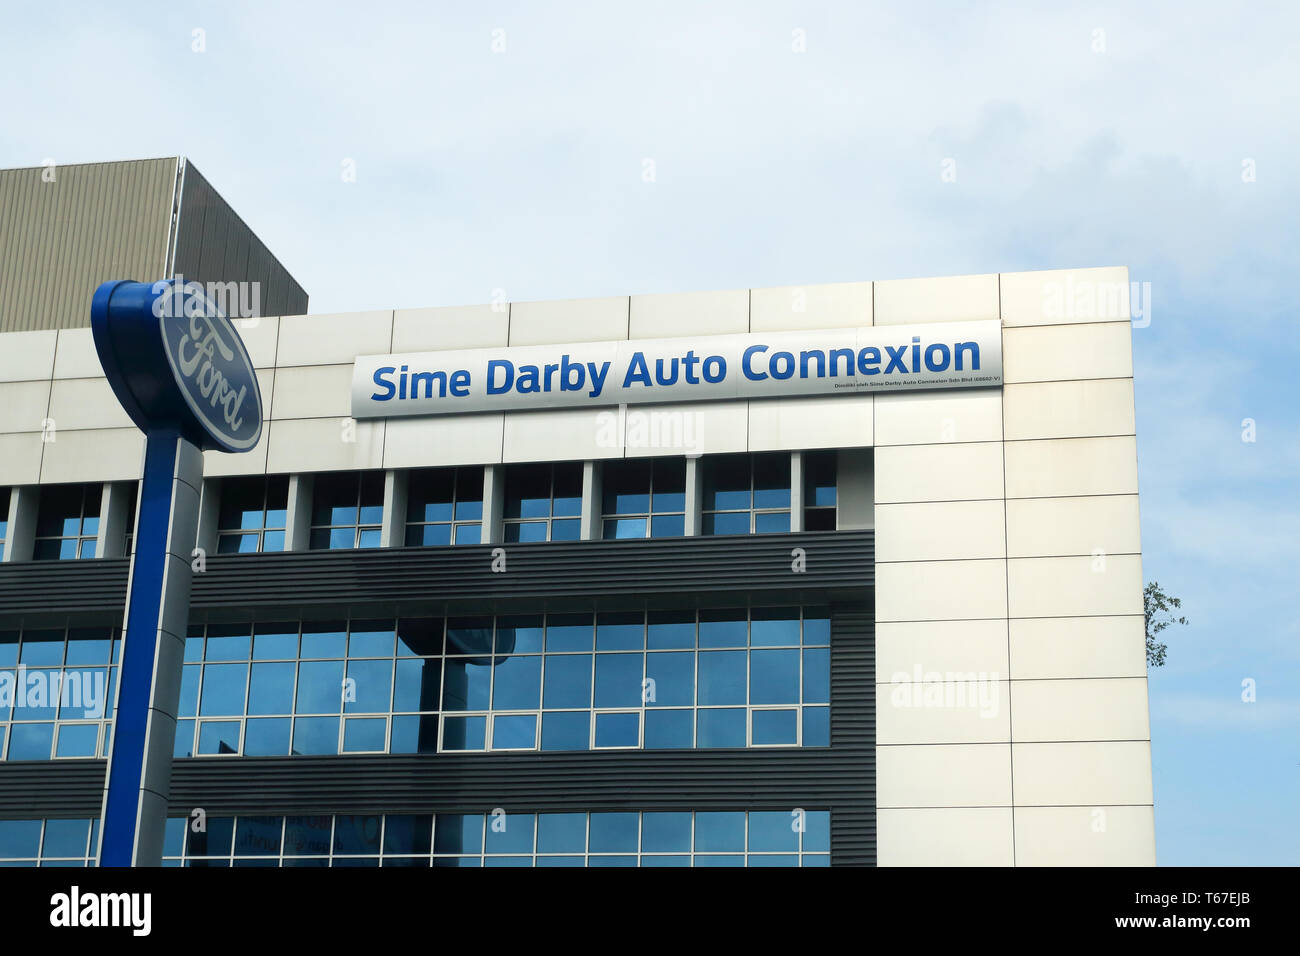 Sime Darby Auto Connection Ford Kuala Lumpur in Malesia Foto Stock